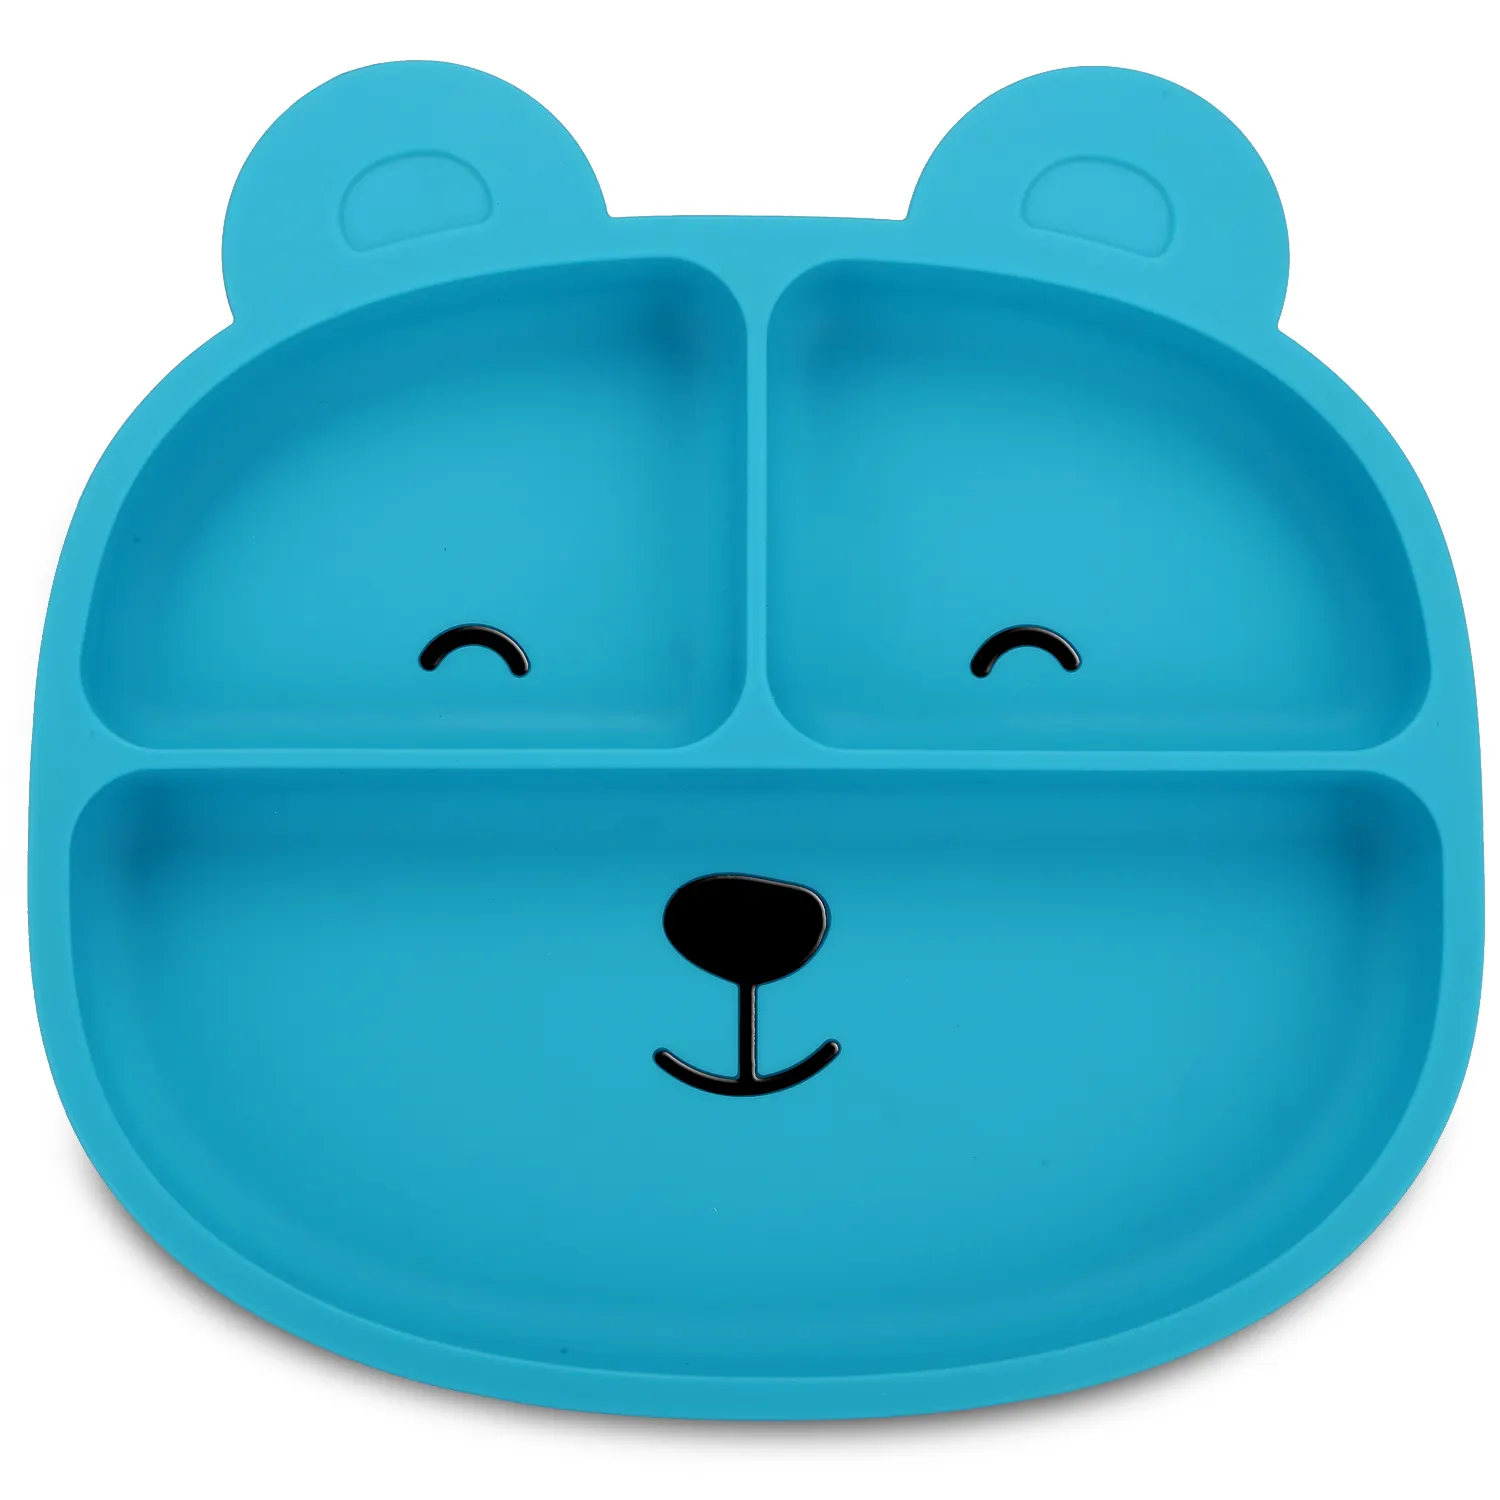 Leatchliving Silicone Baby Plate with Strong Suction Cups Kids Bear Divided Plate Silicone Baby Suction Plate